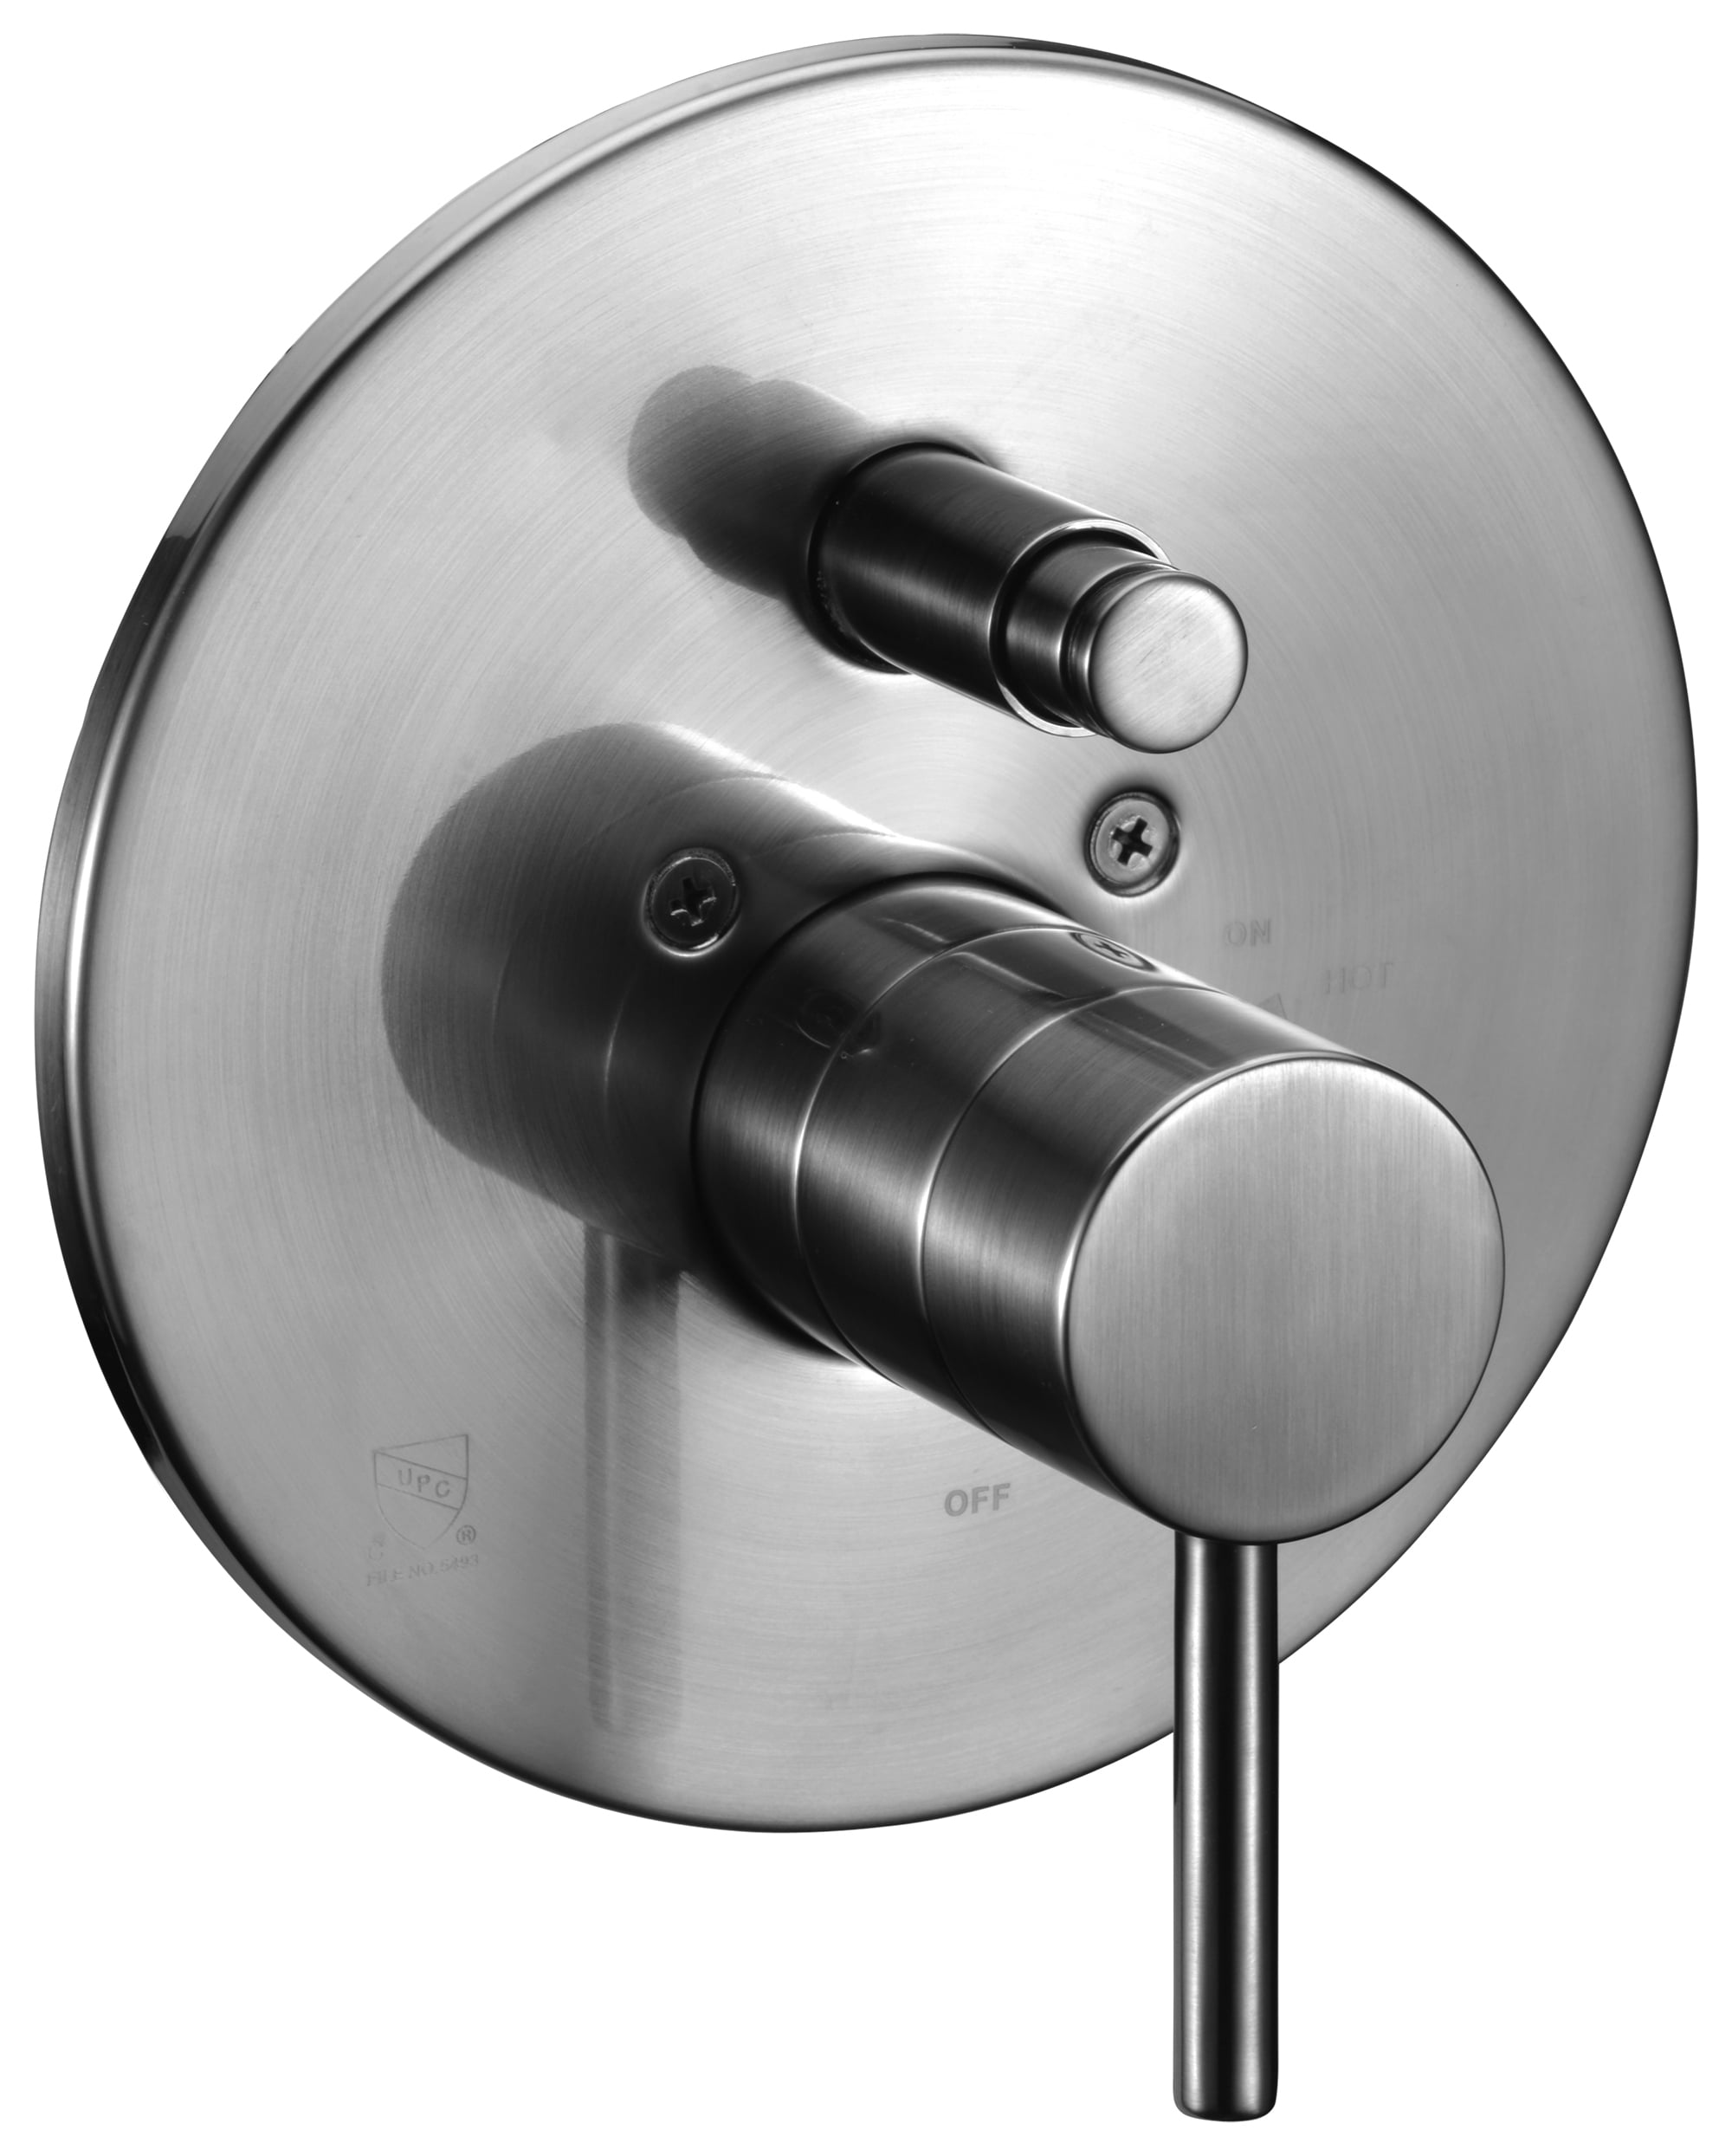 Picture of ALFI Brand AB1701-BN Pressure Balanced Round Shower Mixer with Diverter - Brushed Nickel